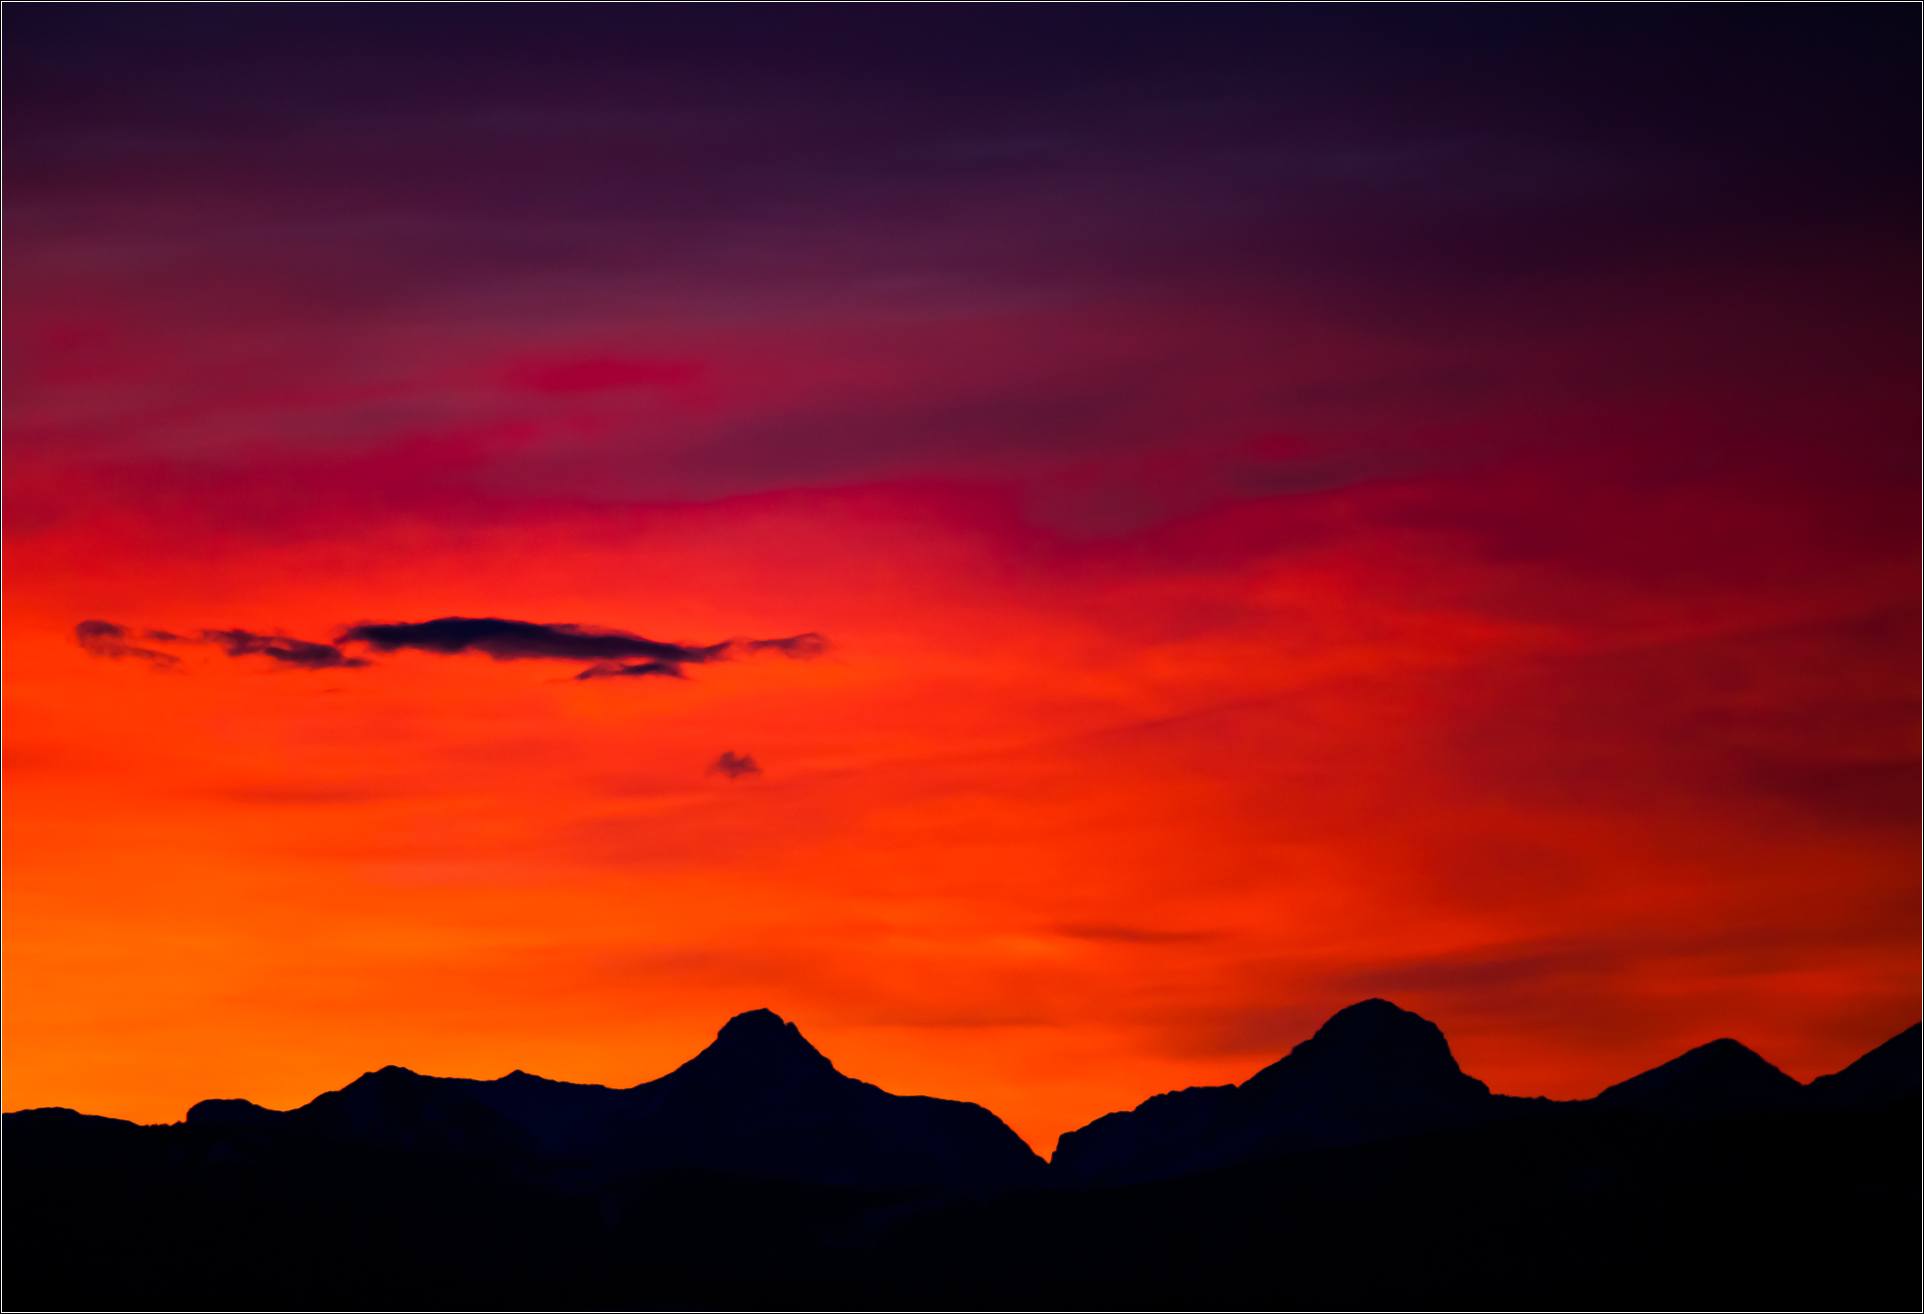 chinook-sunsets-over-the-rockies-c2a9-christopher-martin-9926.jpg